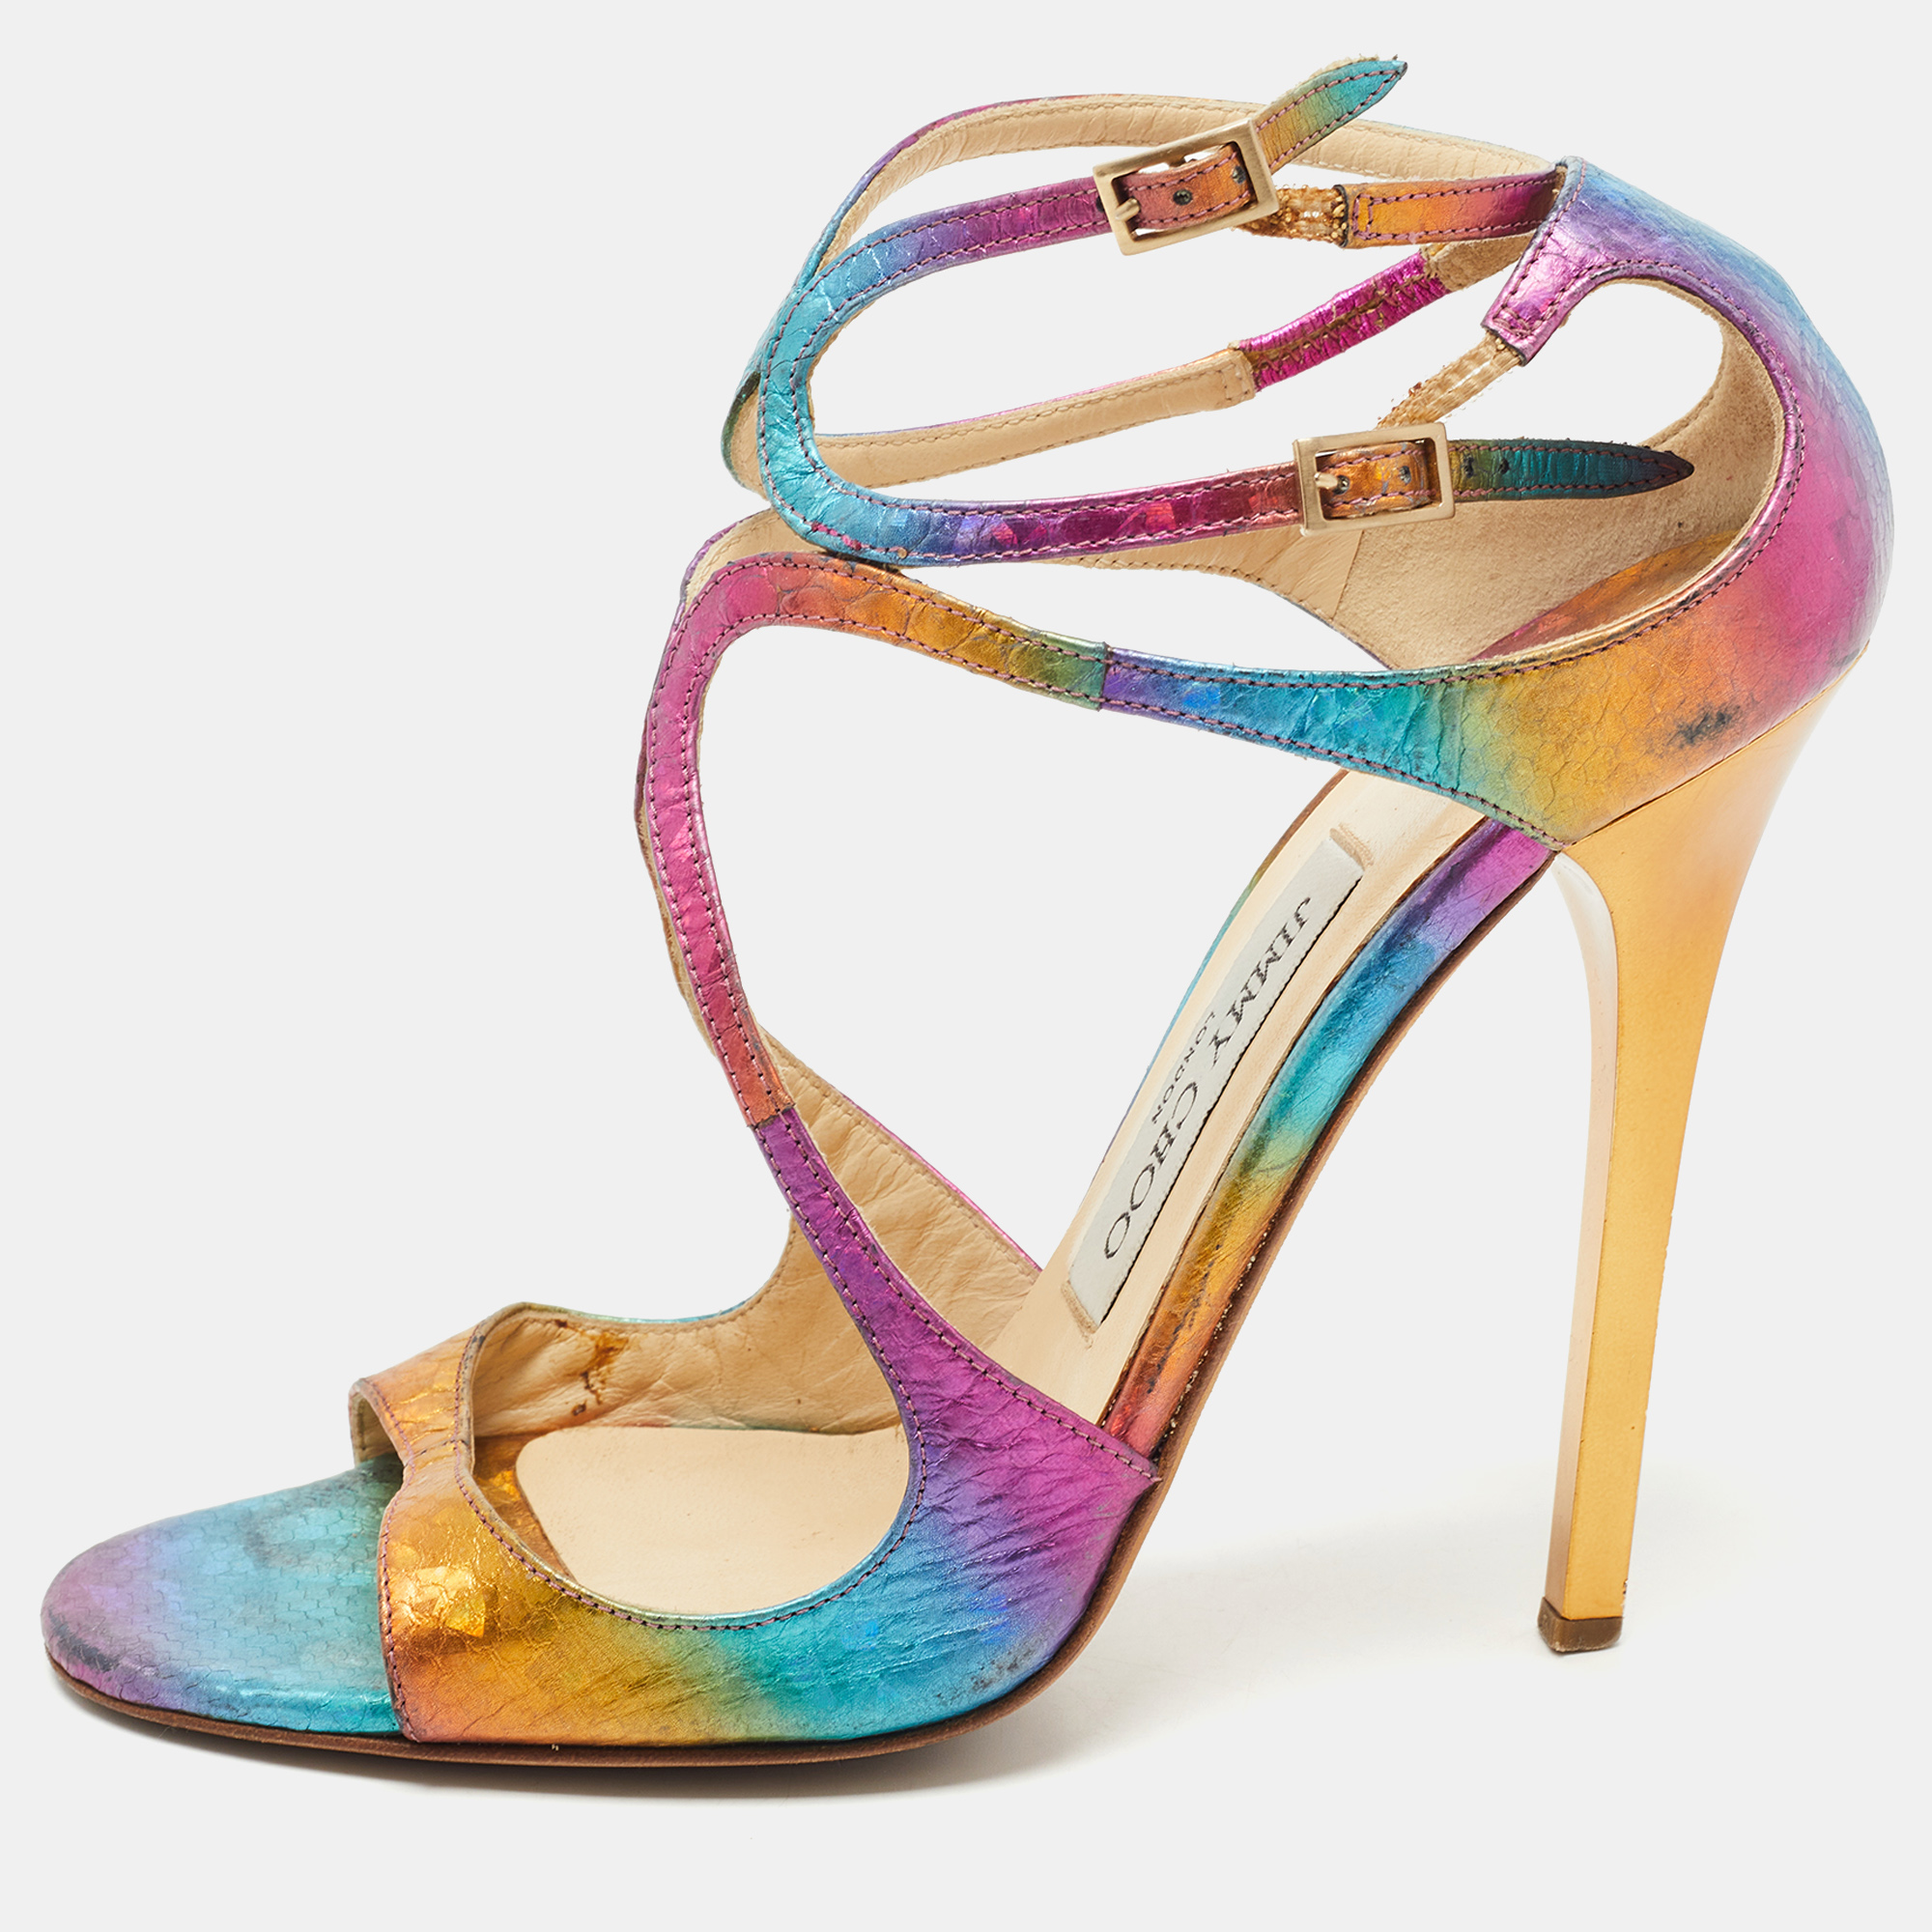 Pre-owned Jimmy Choo Multicolor Python Embossed Leather Lance Sandals Size 37